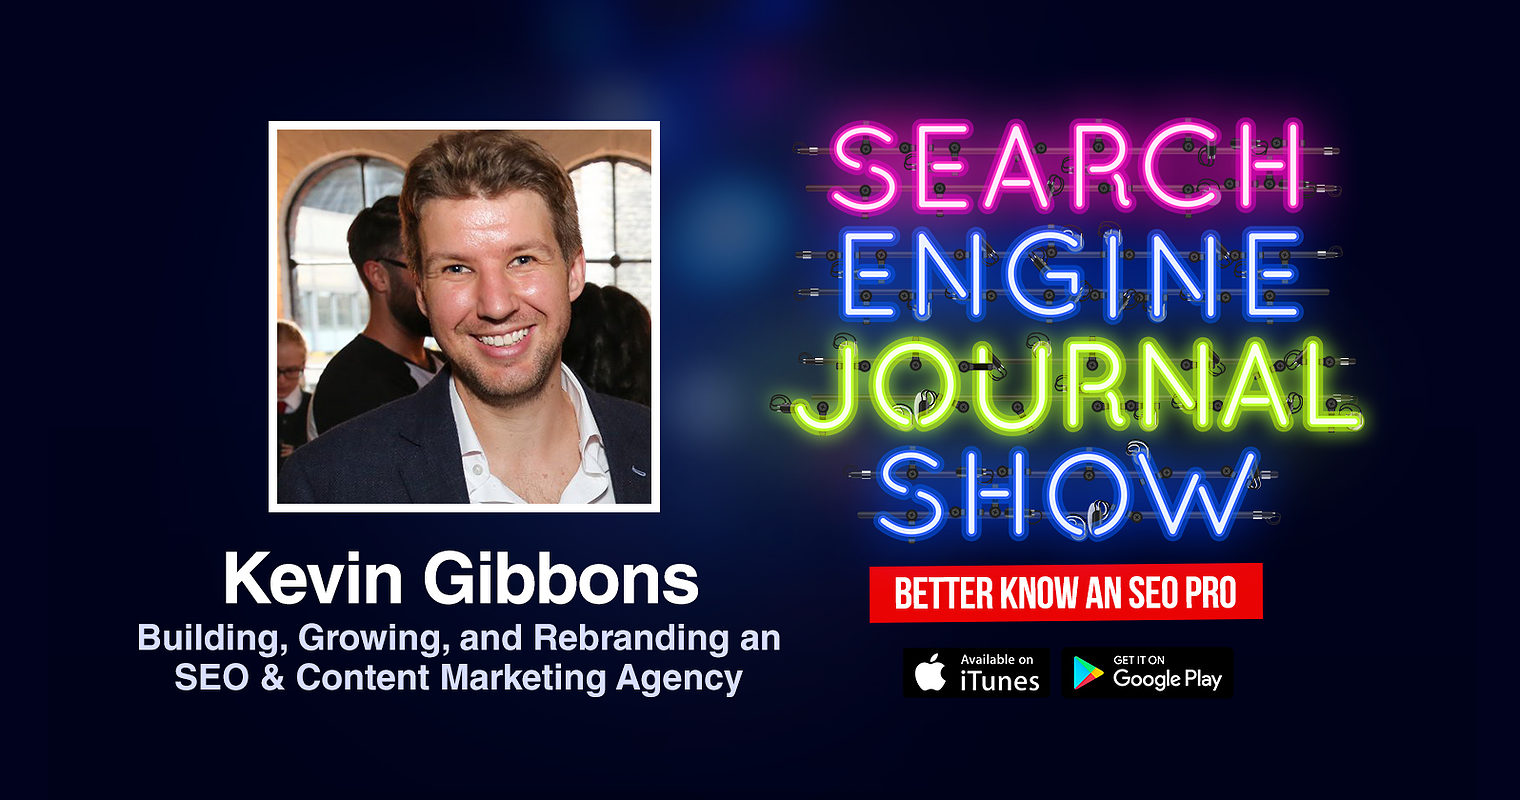 Kevin Gibbons on Building, Growing, and Rebranding an SEO & Content Marketing Agency [PODCAST]